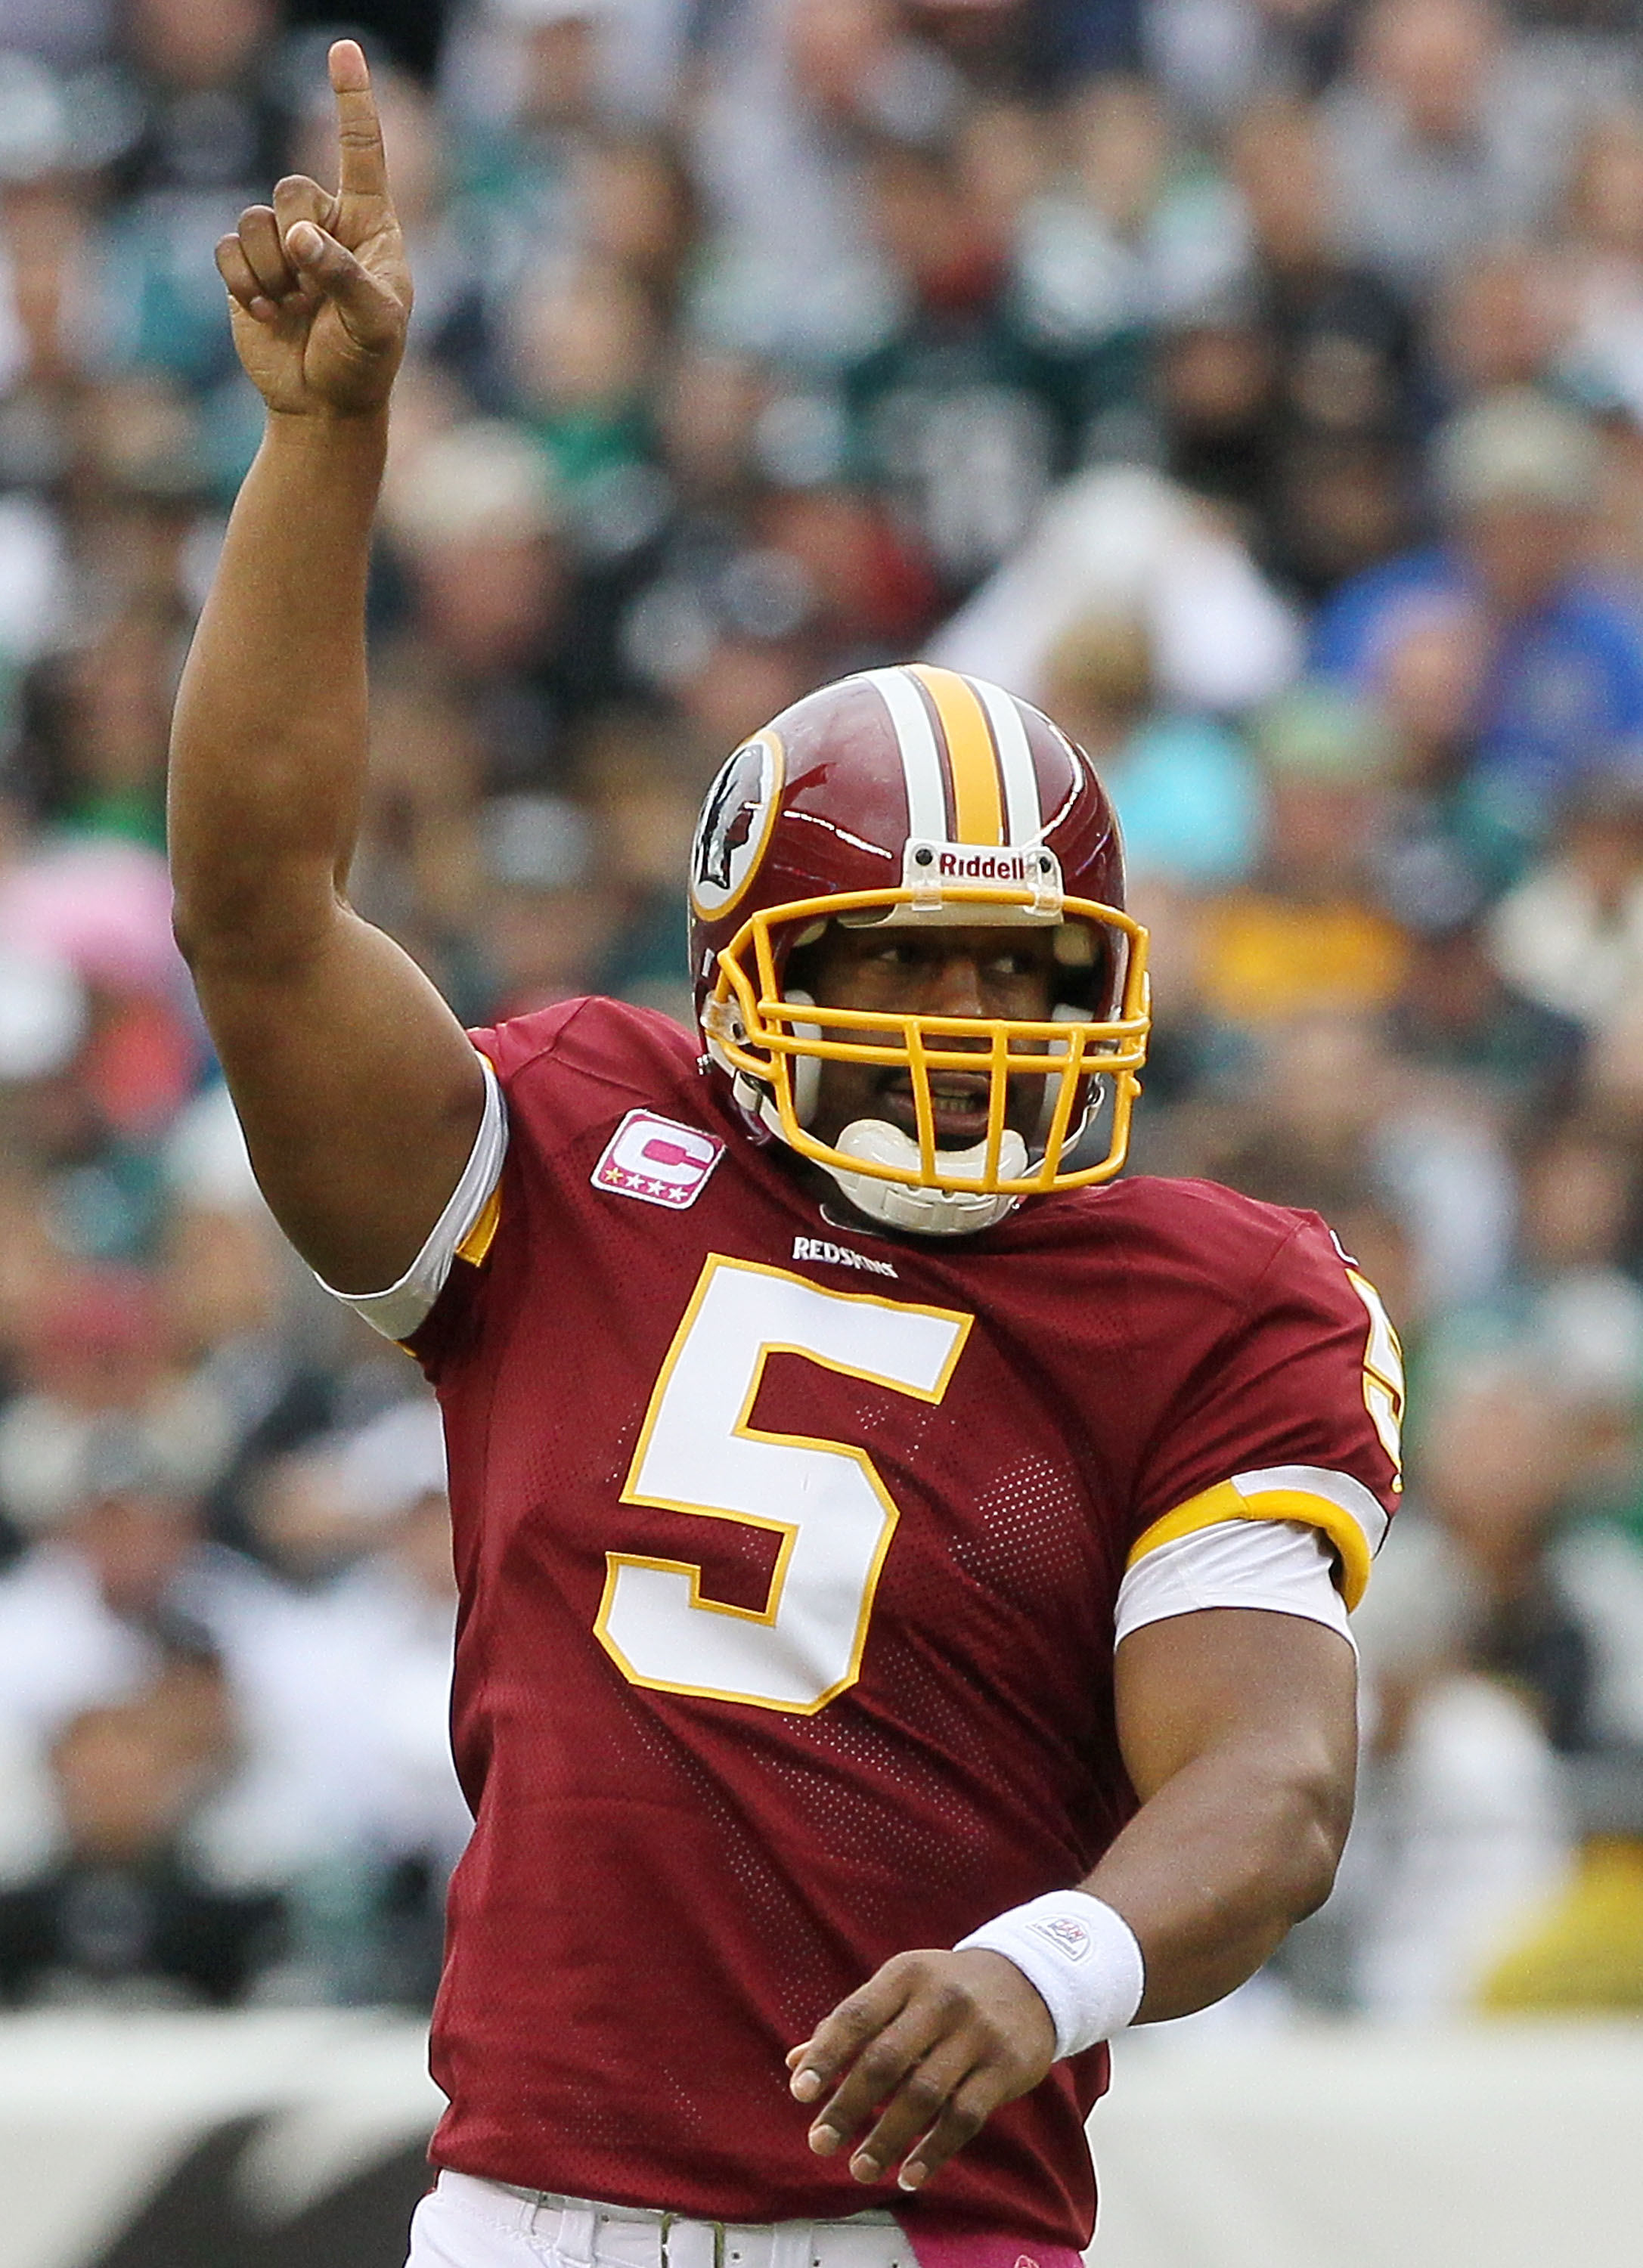 PHILADELPHIA - OCTOBER 03:  Donovan McNabb #5 of the Washington Redskins celebrates after throwing a first quater touchdown pass against the Philadelphia Eagles on October 3, 2010 at Lincoln Financial Field in Philadelphia, Pennsylvania.  (Photo by Jim Mc